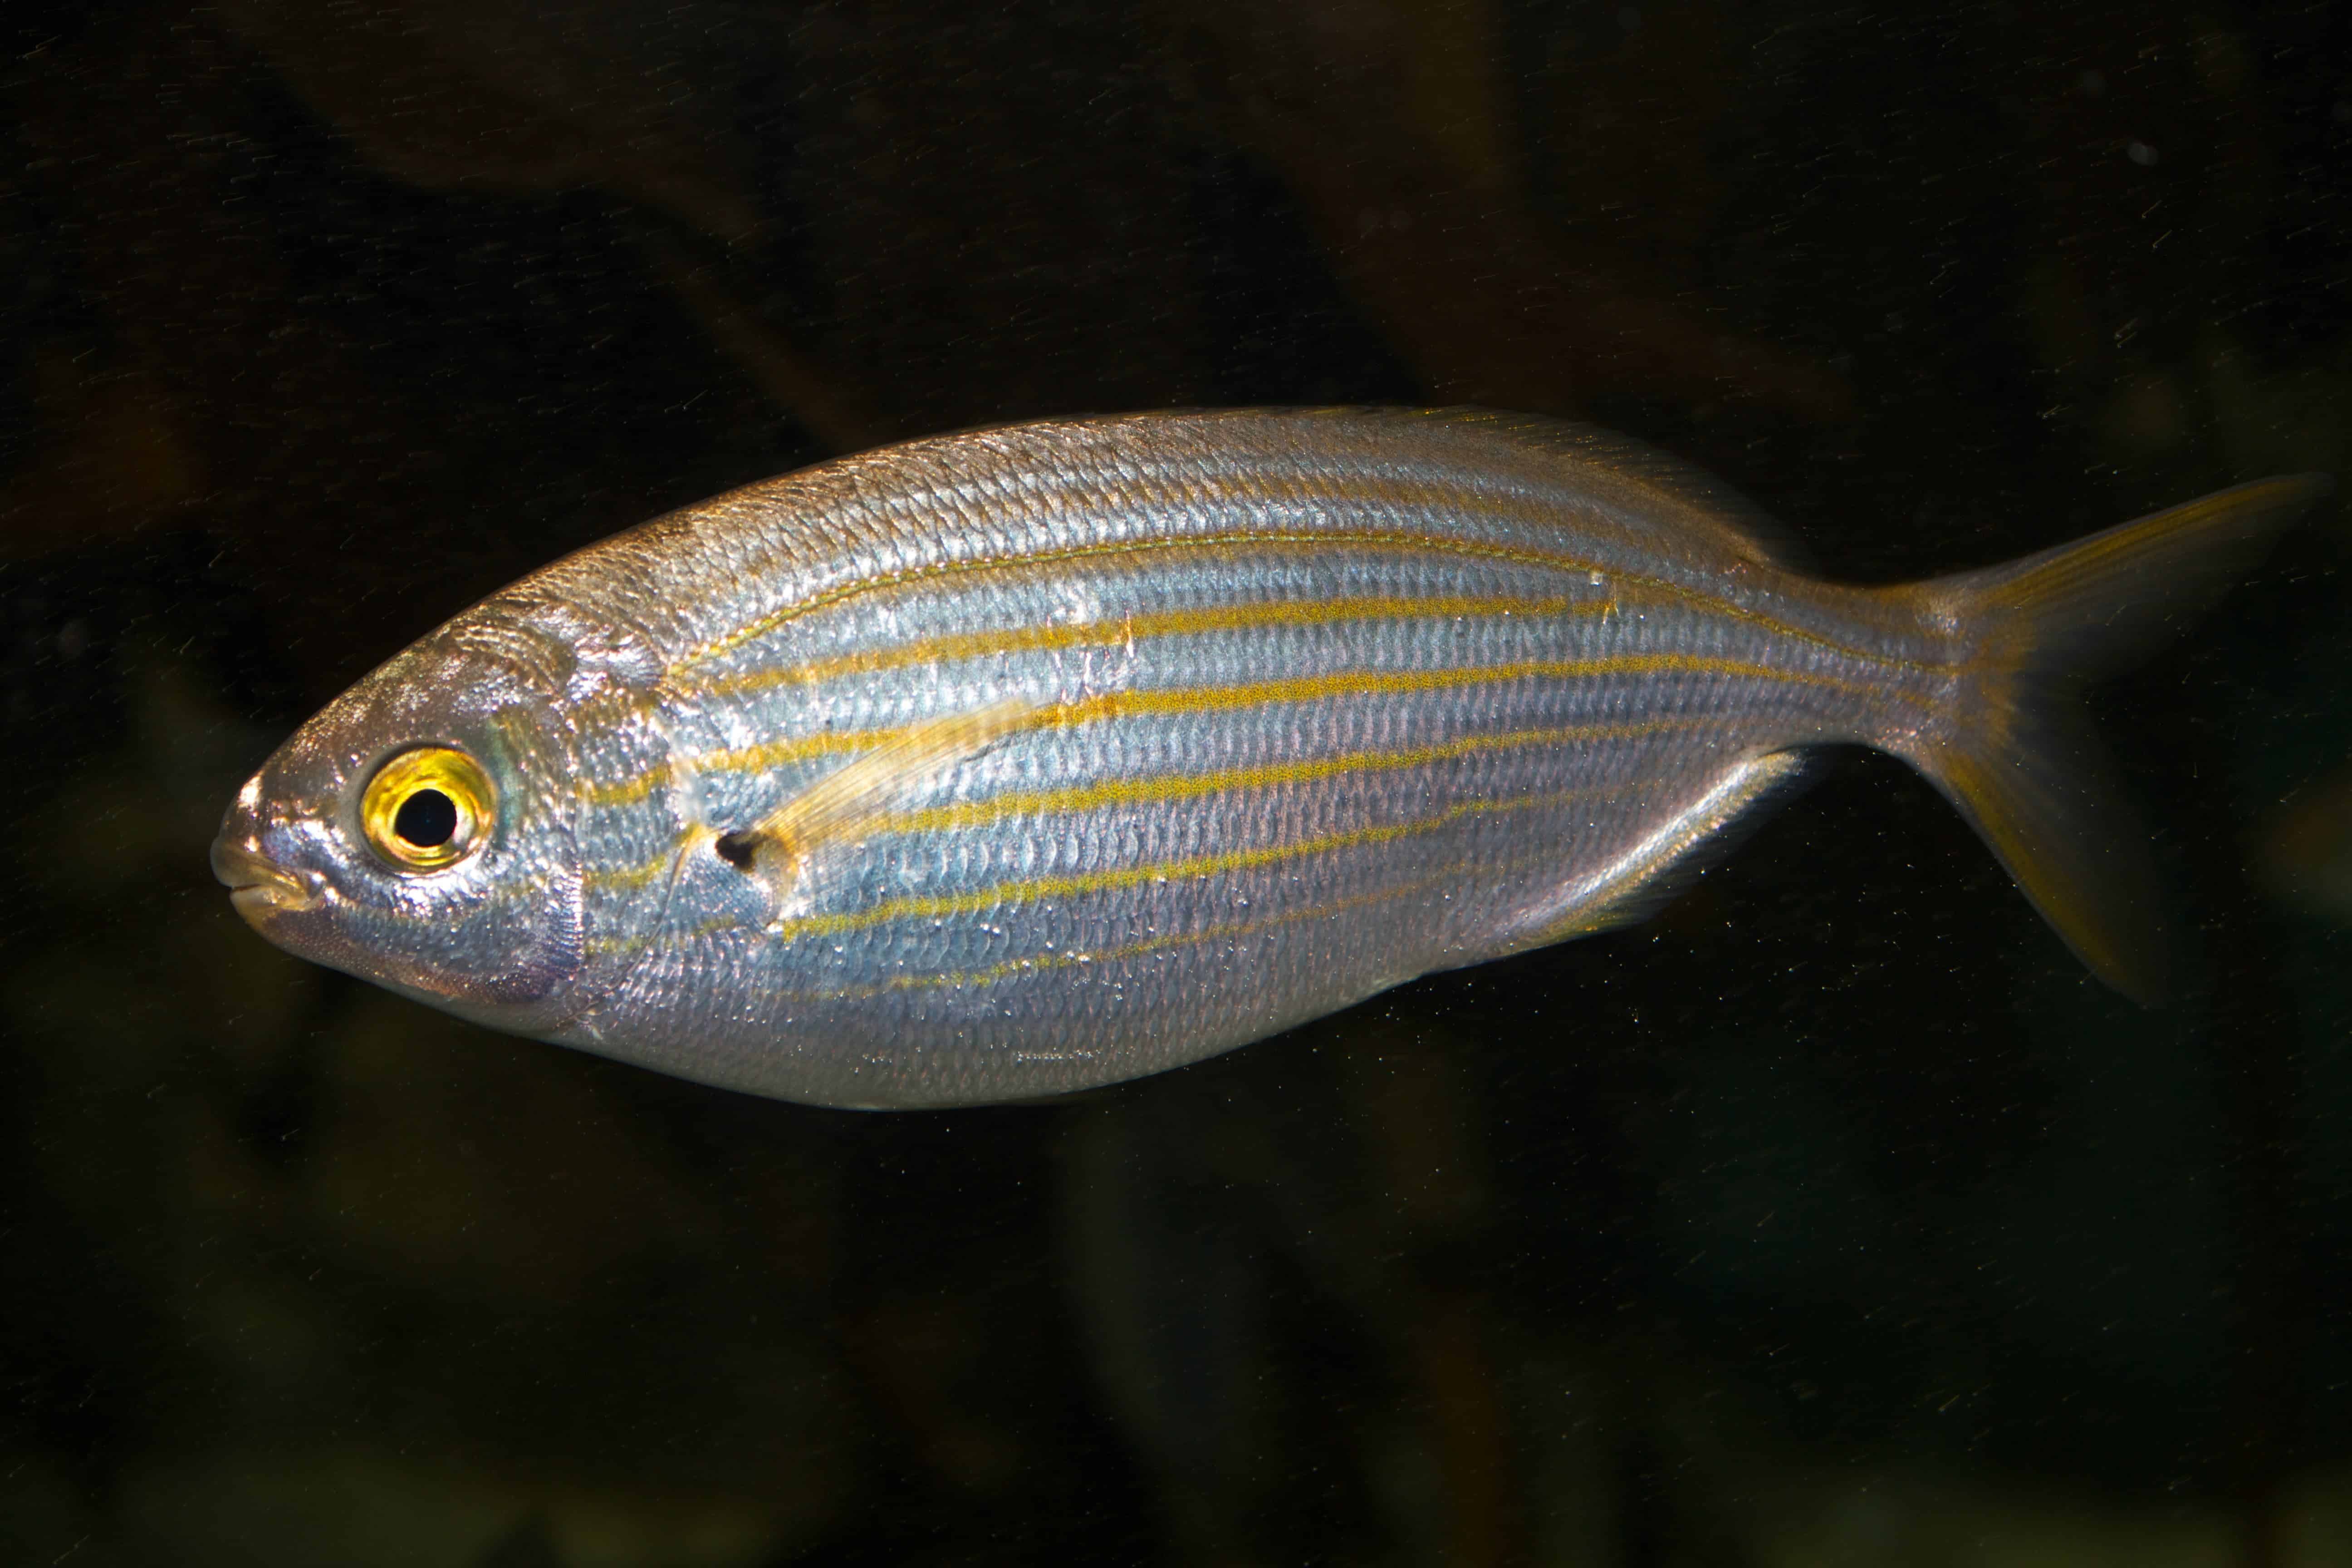 Sarpa salpa -- or as some people call it, “the fish that makes dreams.” Image credits: Brian Gratwicke.